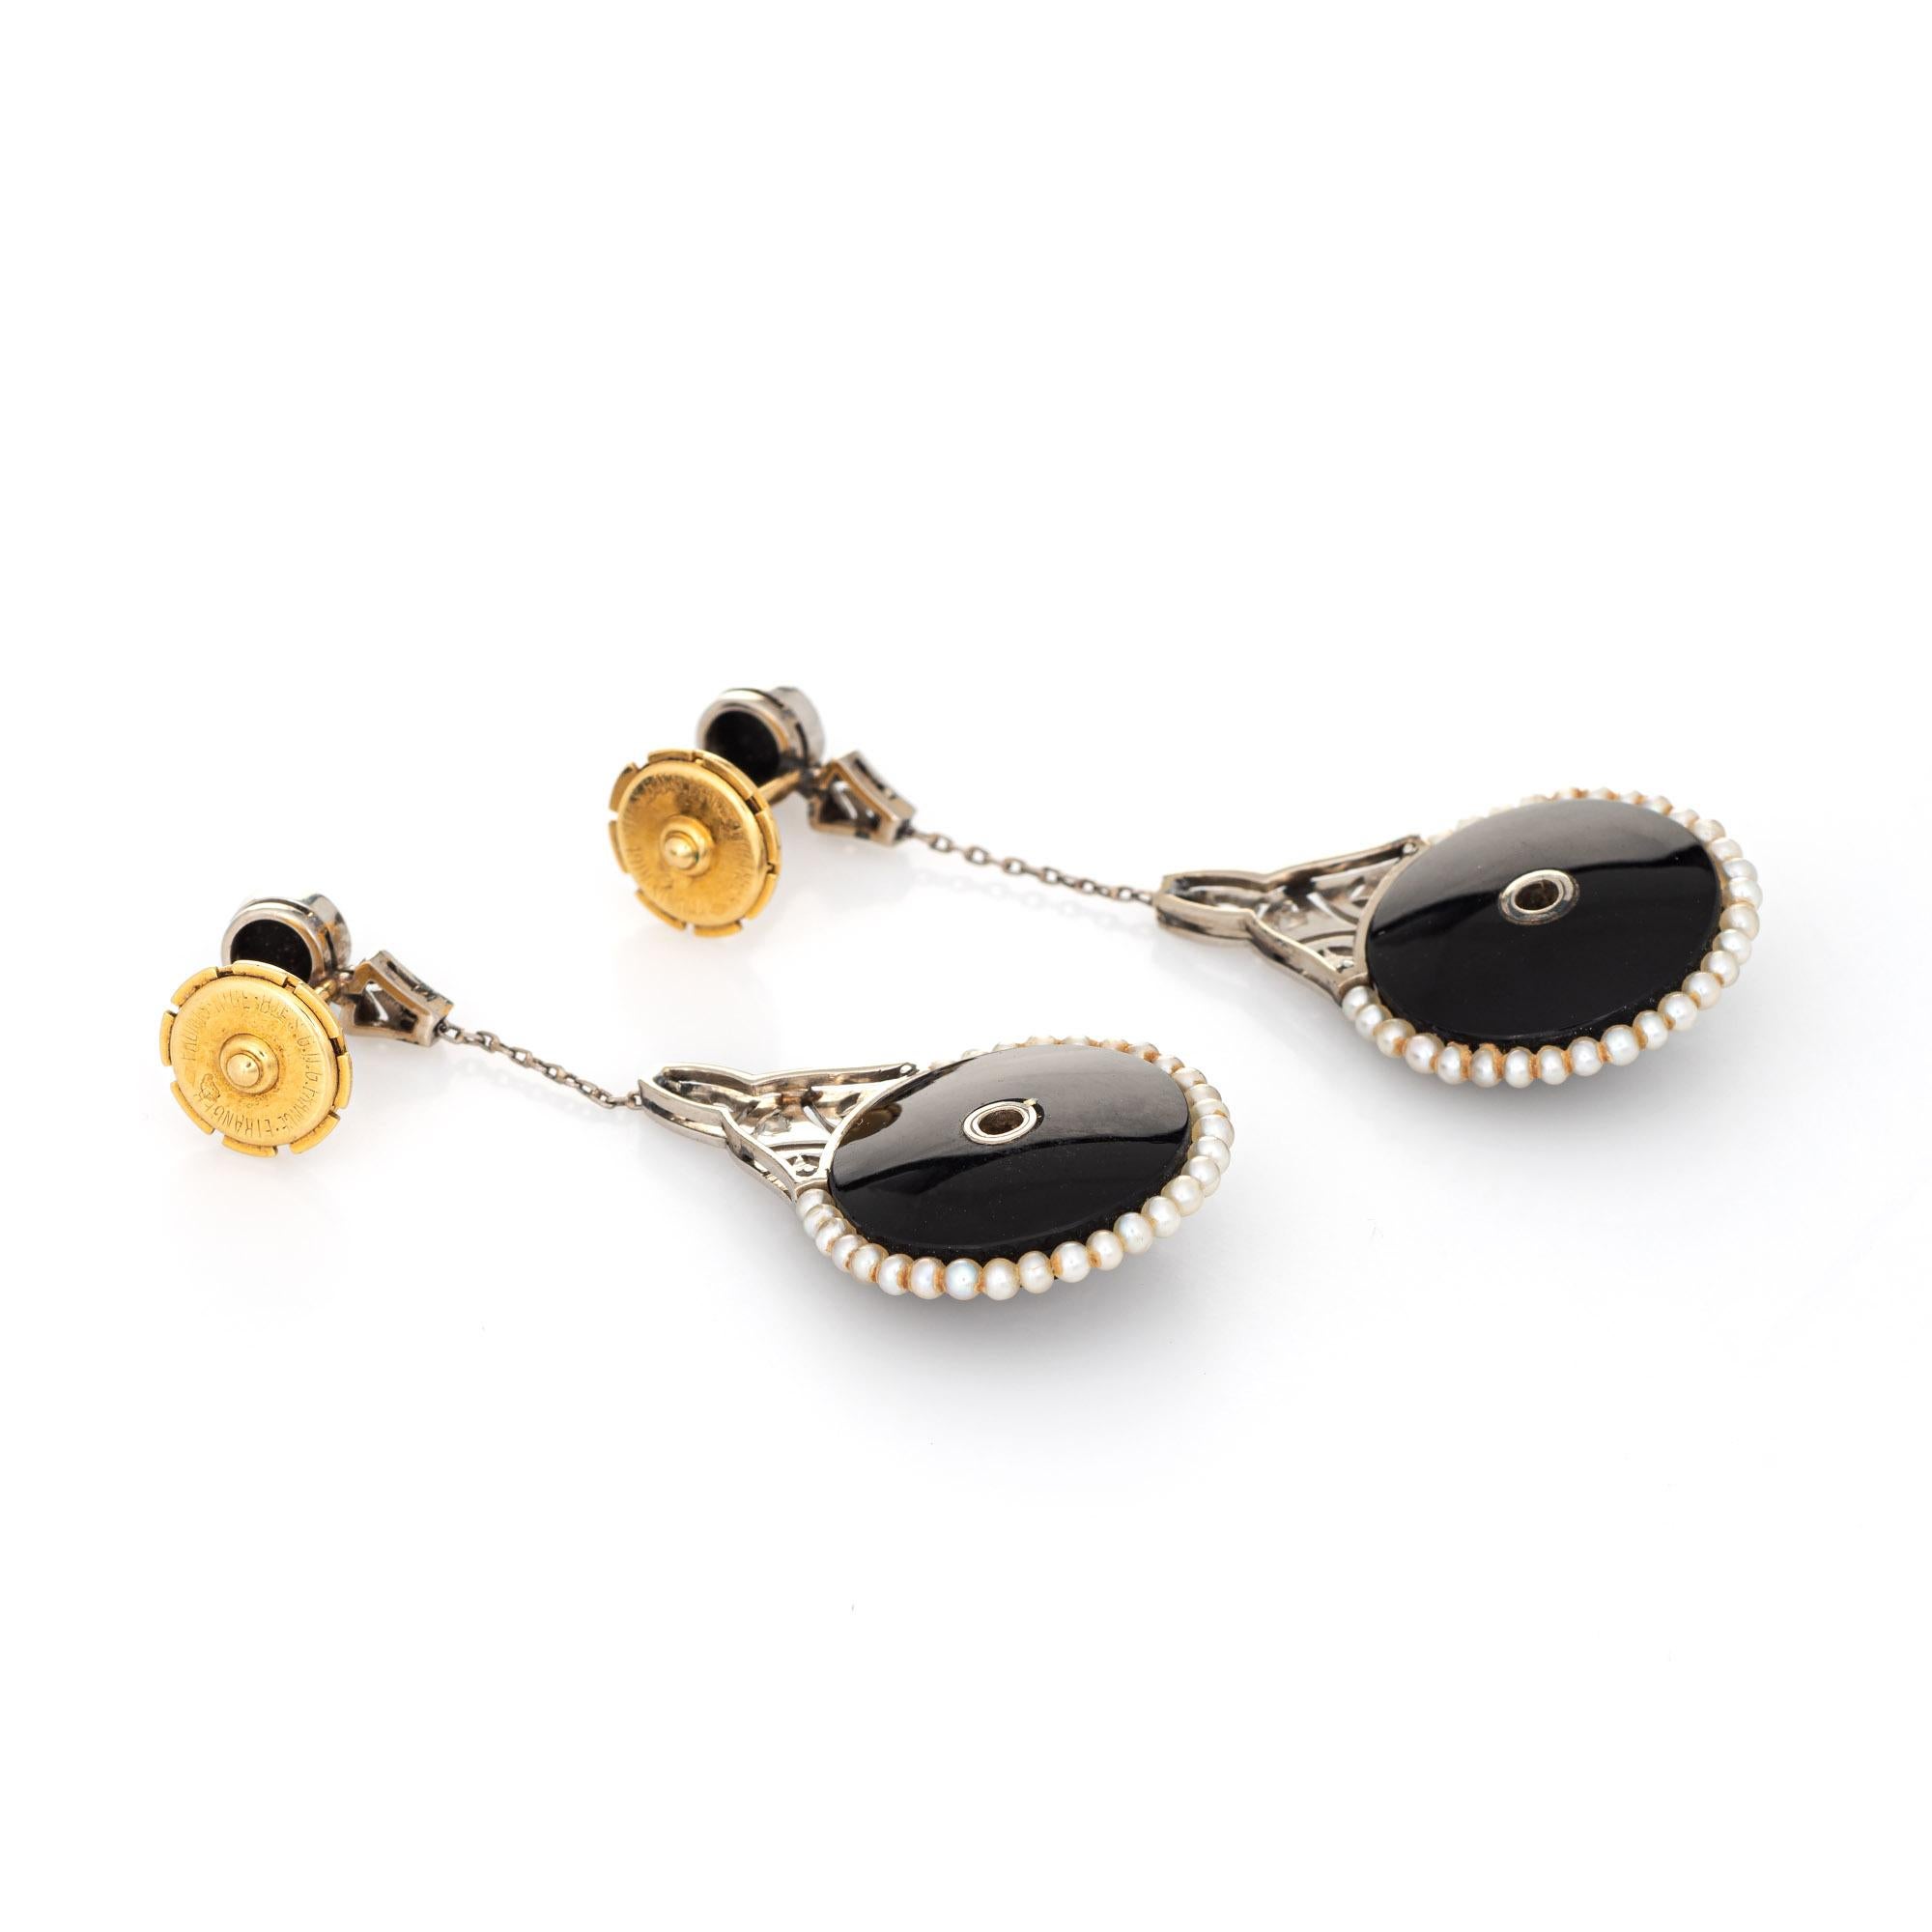 Elegant pair of antique Belle Epoque earrings set with diamonds, onyx and seed pearls (circa 1900s to 1910s). 

Old European and rose cut diamonds total an estimated 0.18 carats (estimated at H-I color and SI2-I1 clarity). The onyx measures 14mm